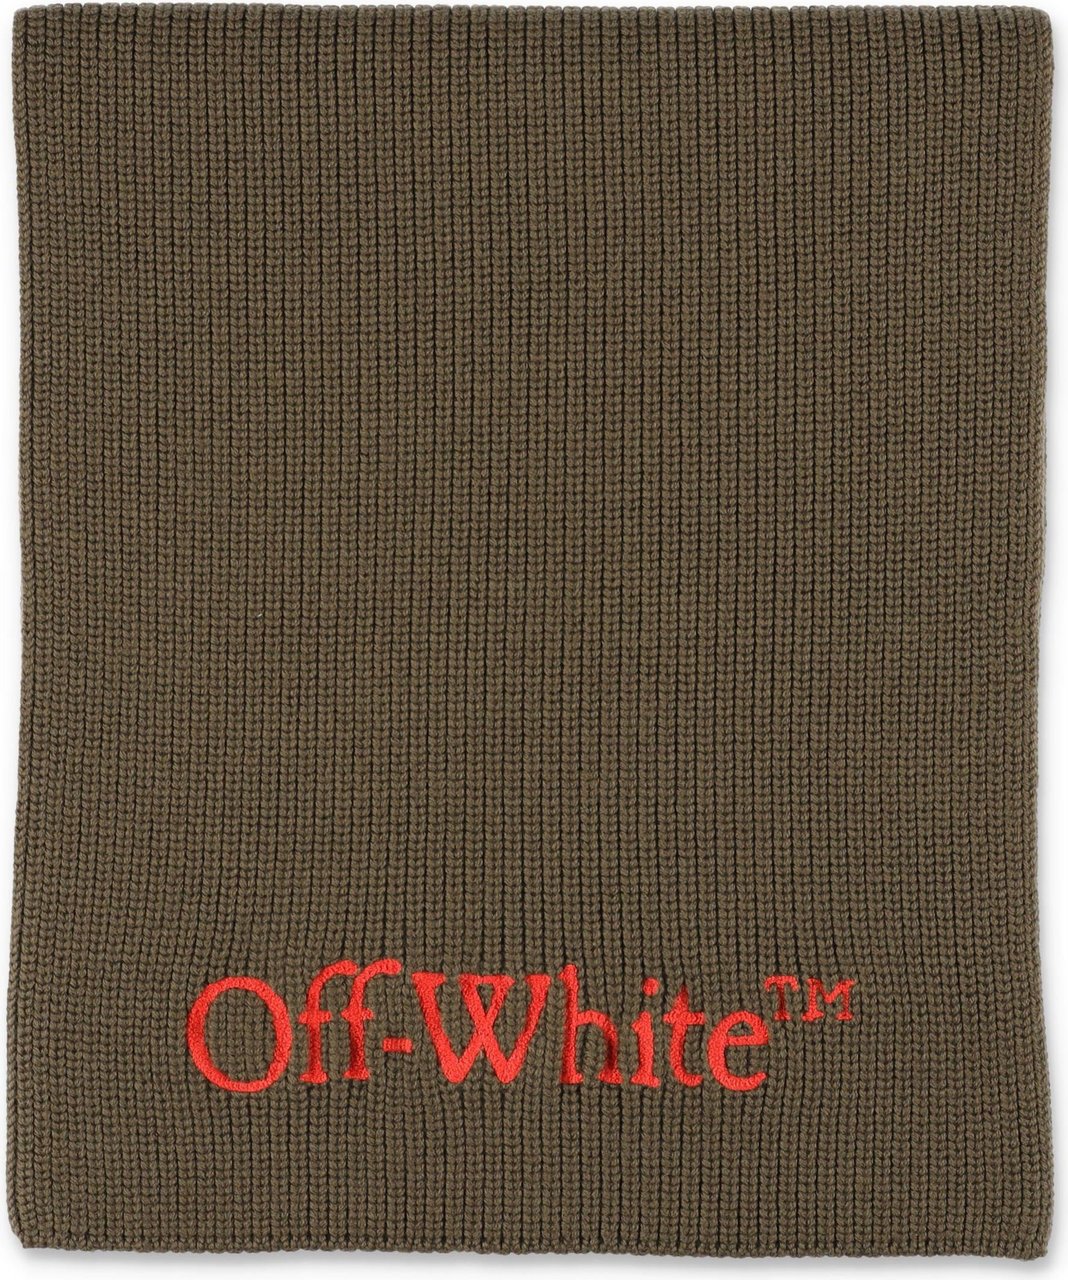 OFF-WHITE BOOKISH KNIT SCARF BLACK SILVER Groen